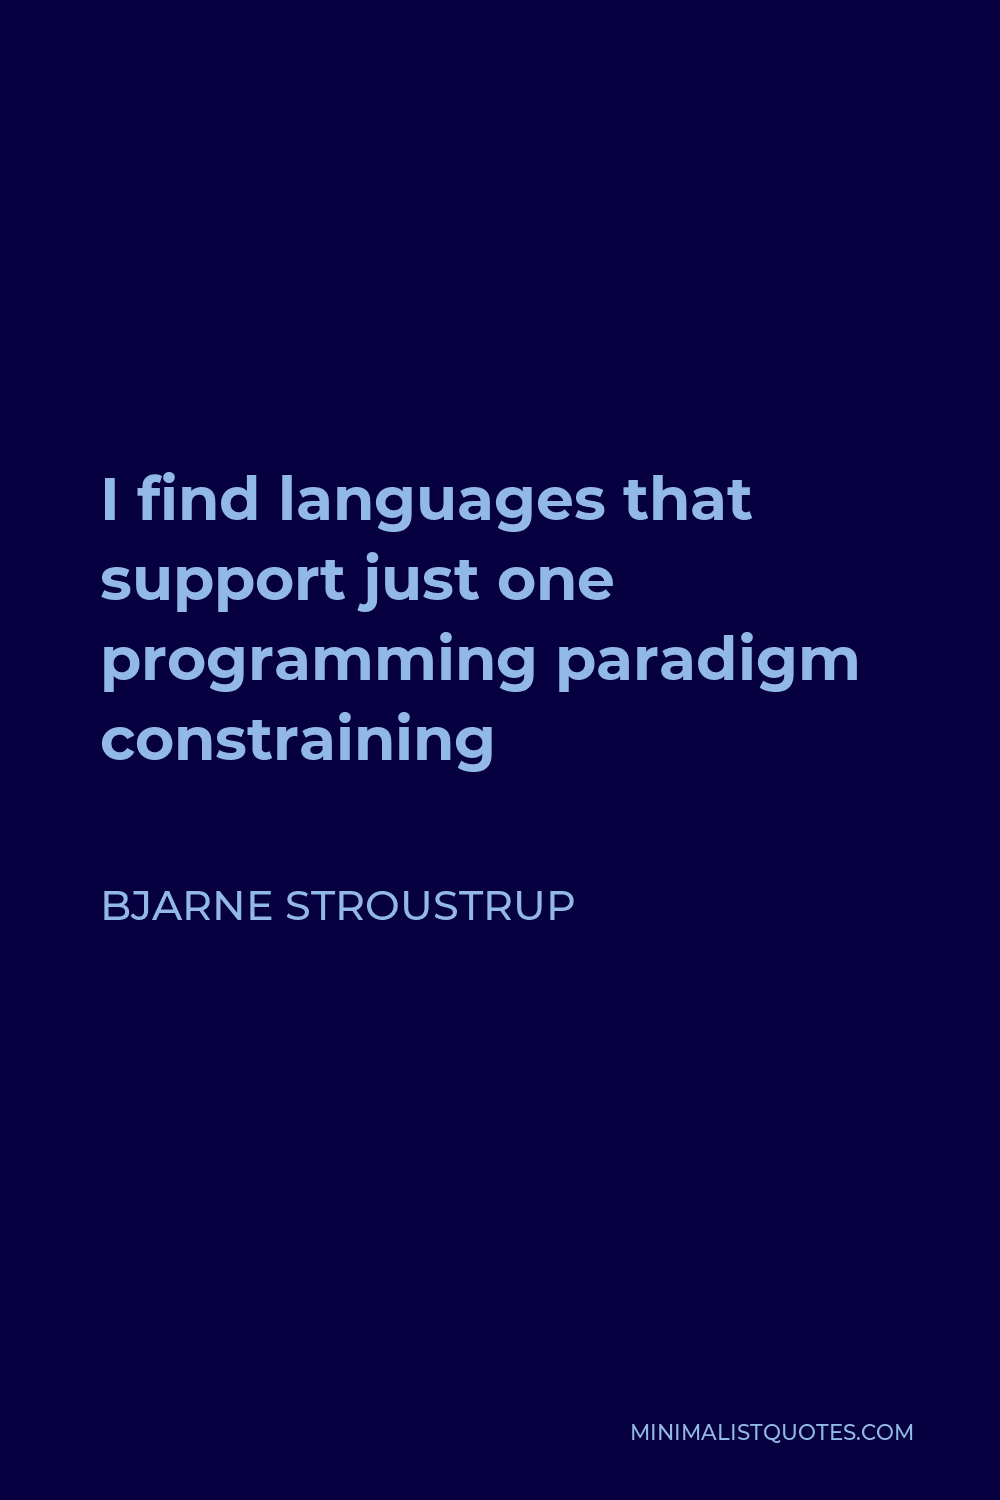 Bjarne Stroustrup Quote - I find languages that support just one programming paradigm constraining